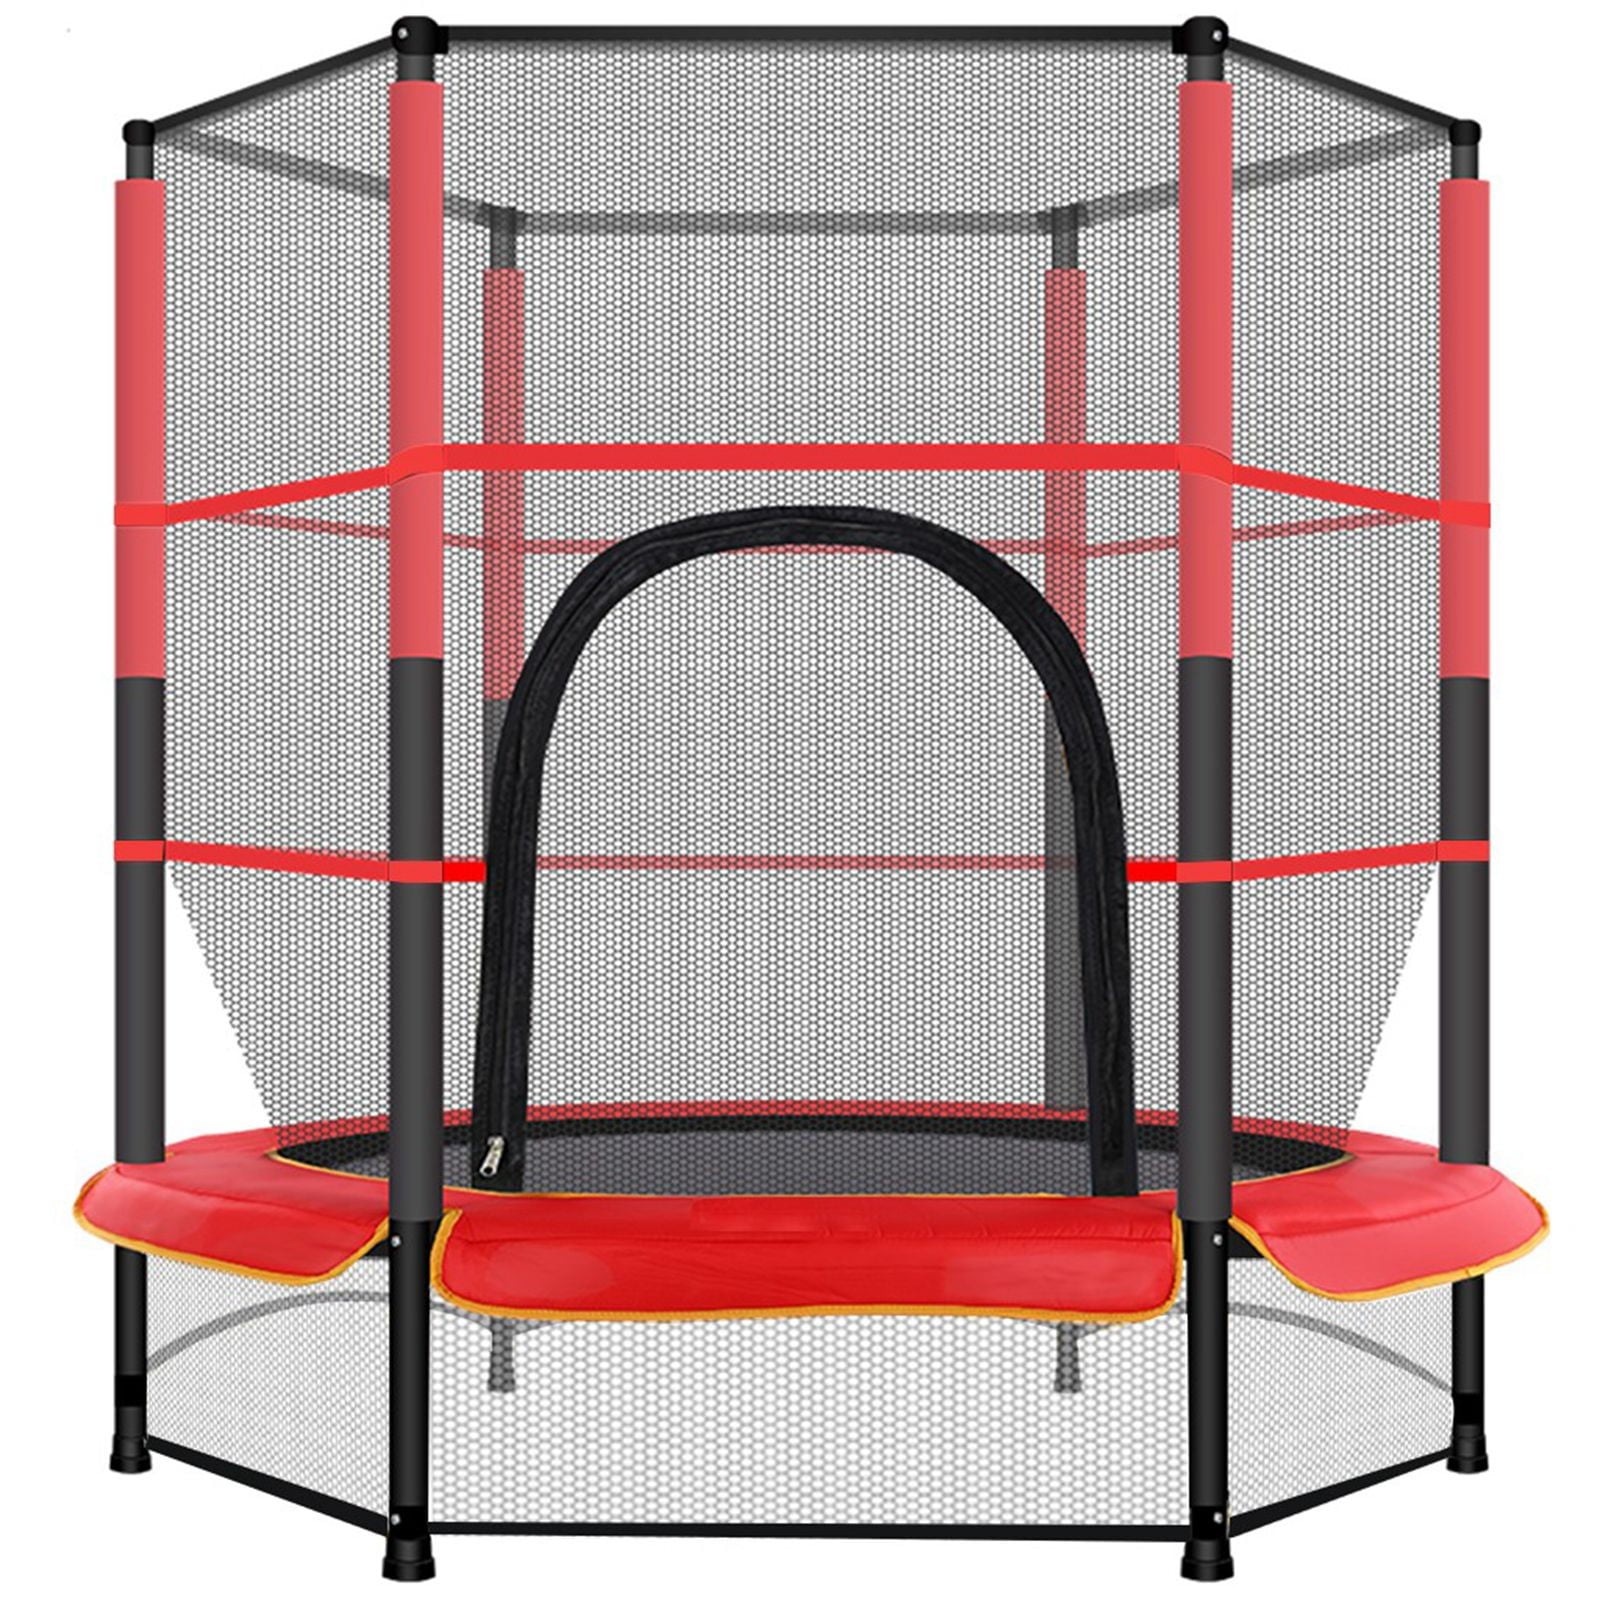 Oxodoi 55 Inch Trampoline for Kids - Outdoor and Indoor Mini Toddler Trampoline with Enclosure, Birthday Gifts for Kids, 100 LB Capacity